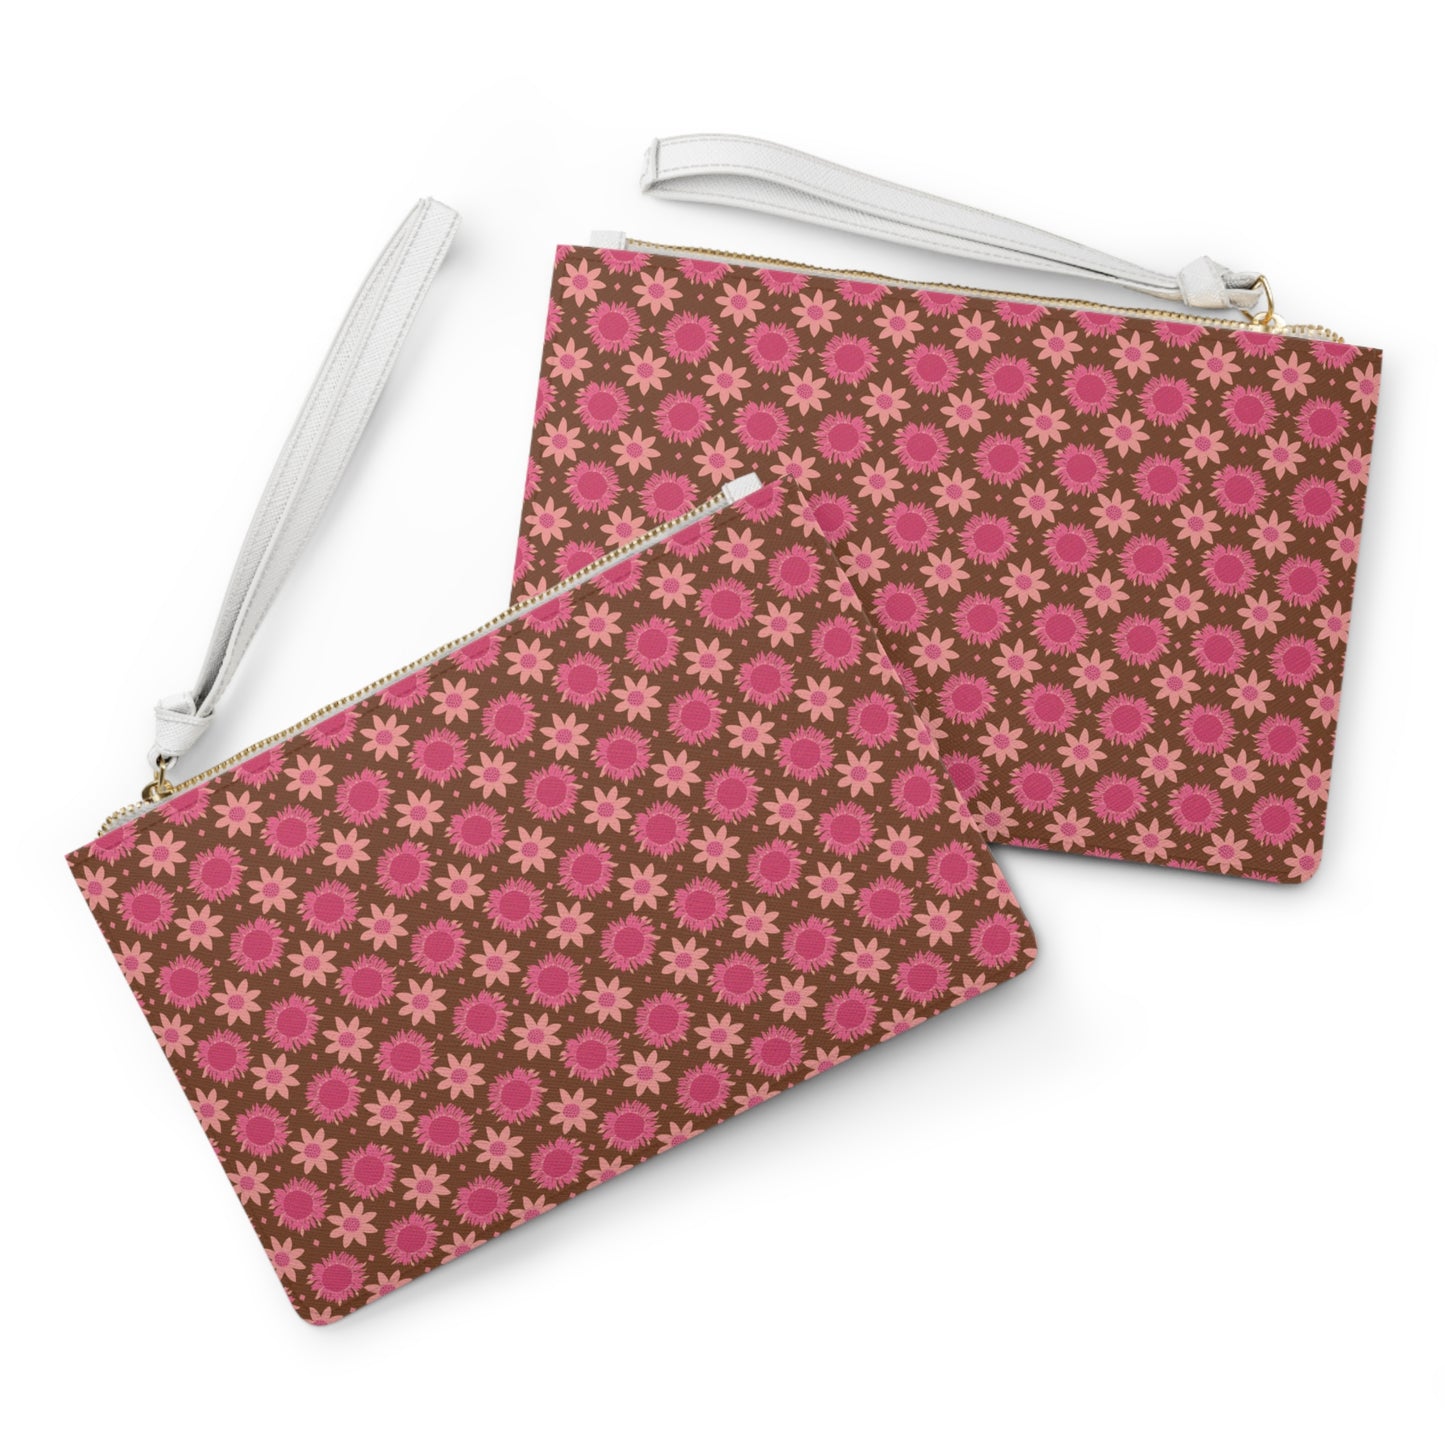 Retro Pink Daisies on Brown Background Clutch Bag